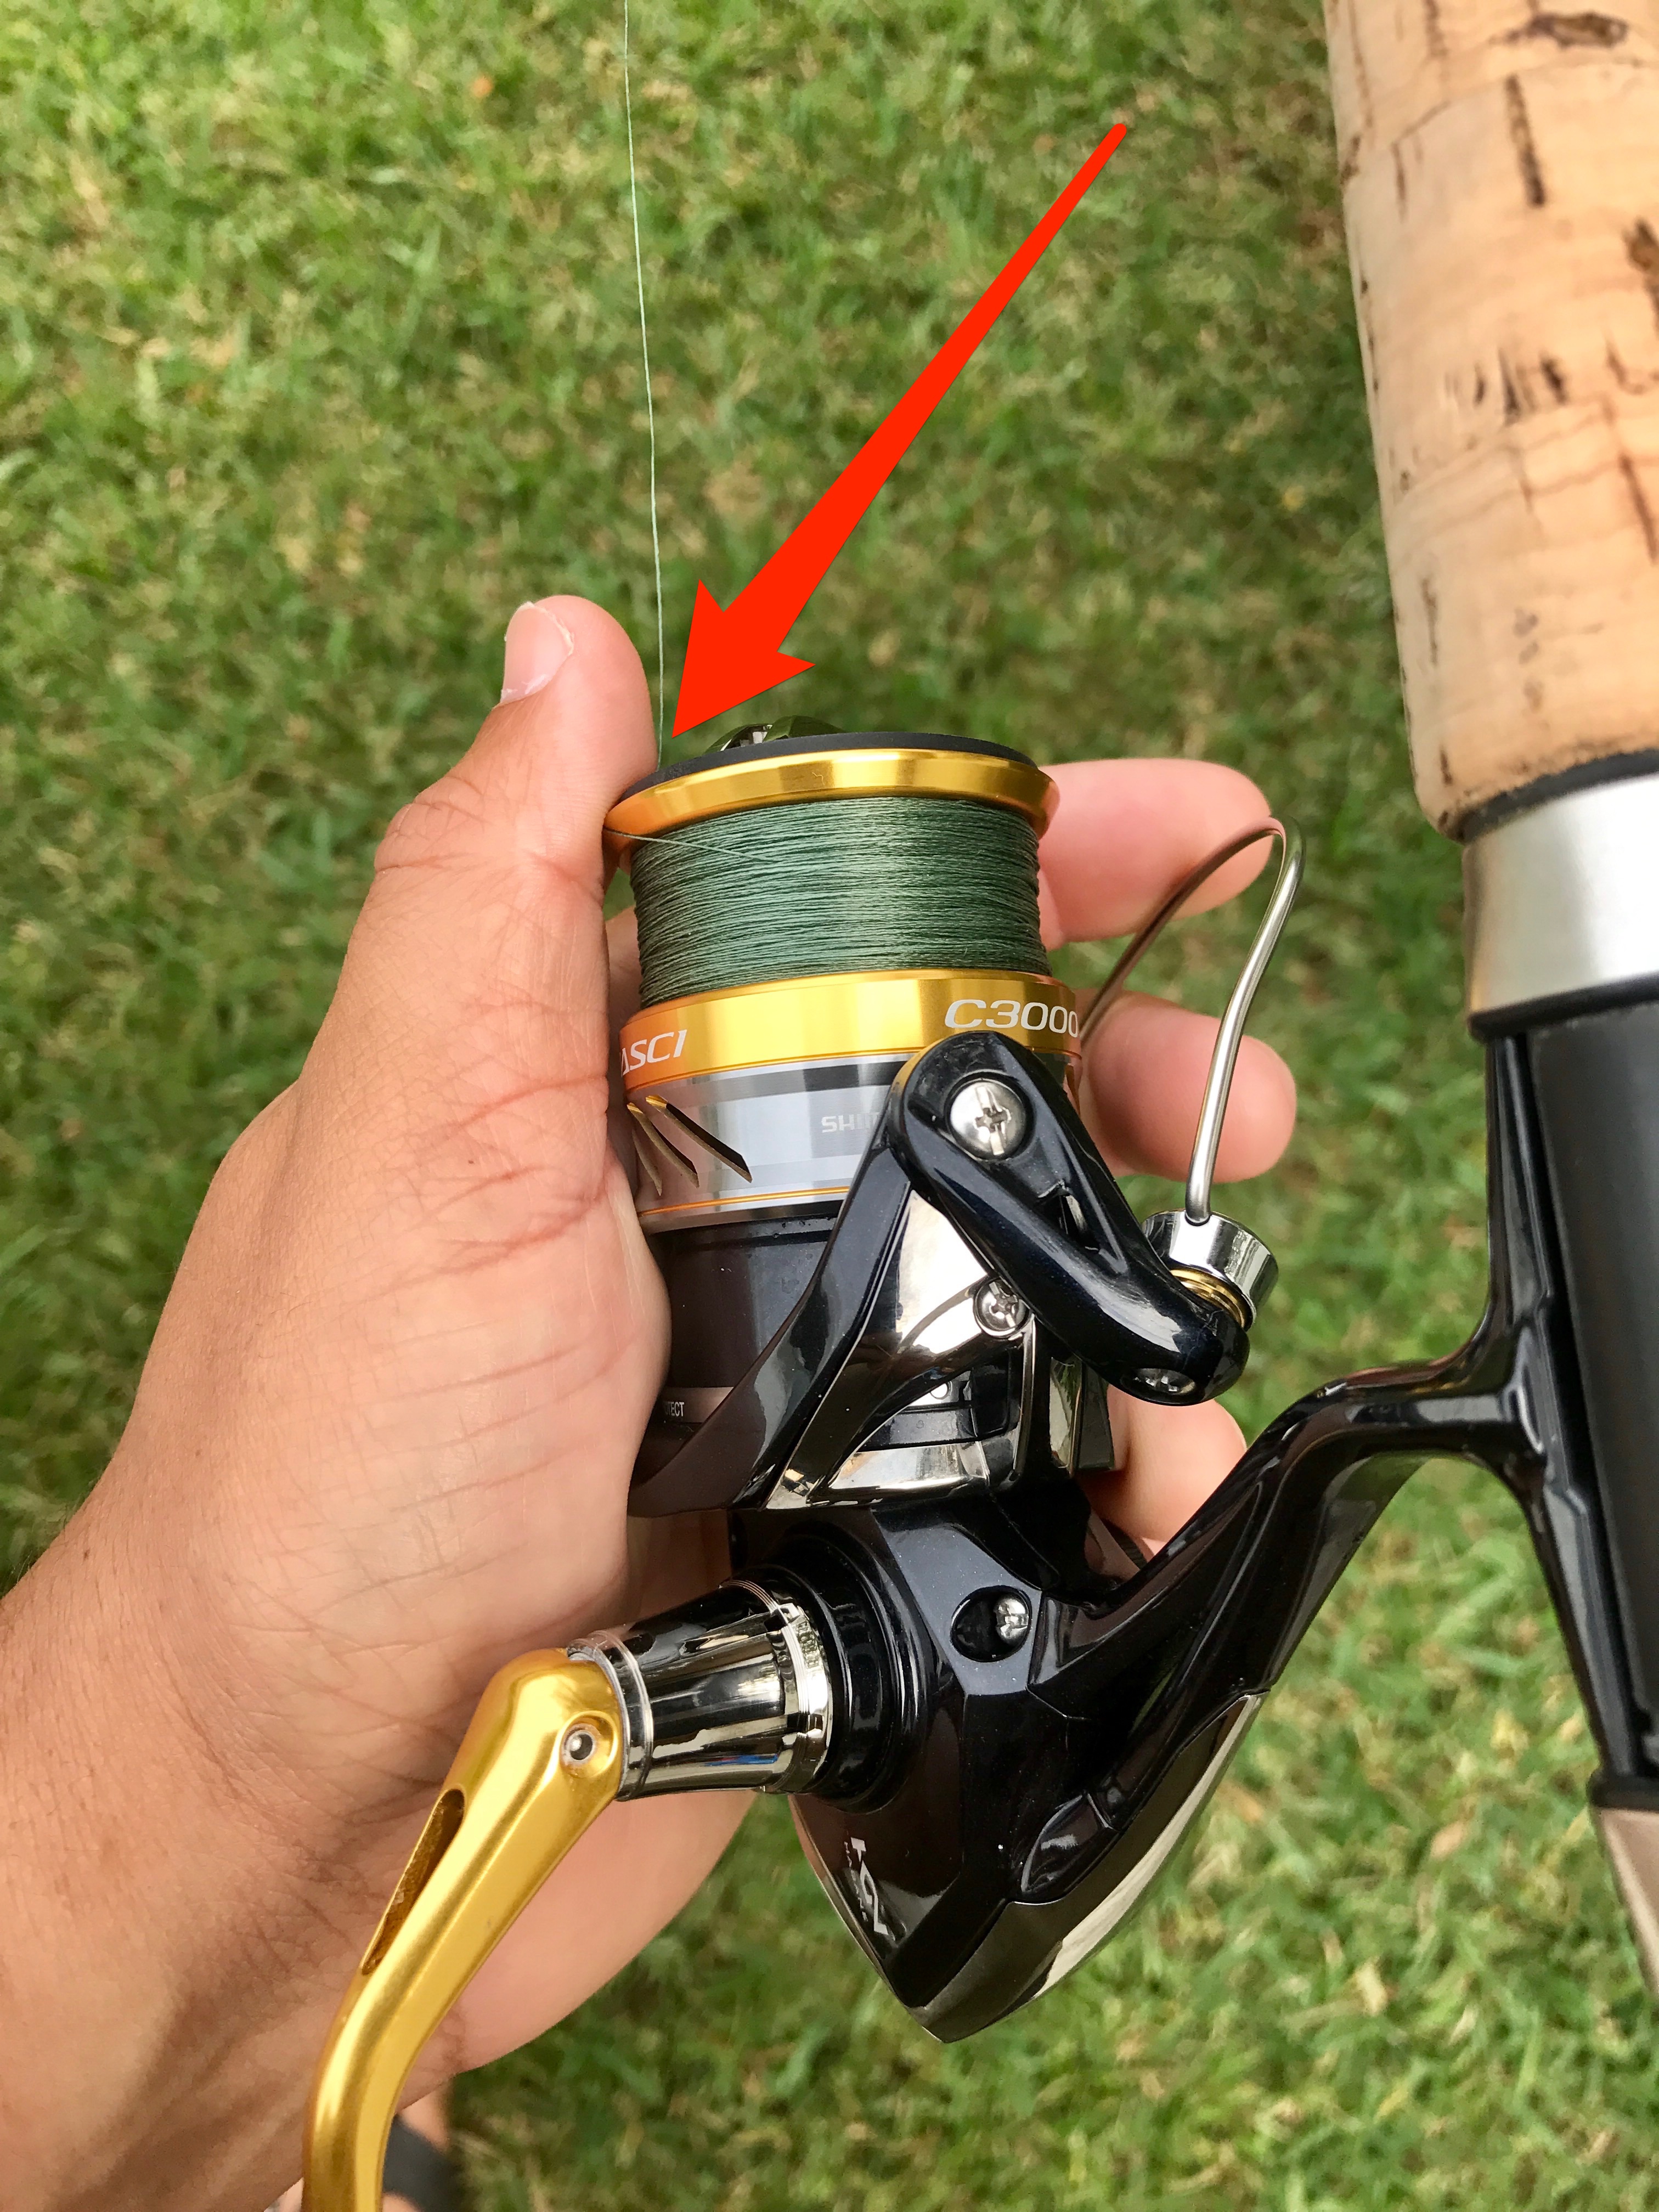 How To Prevent Your Fishing Line from Getting Tangled With These